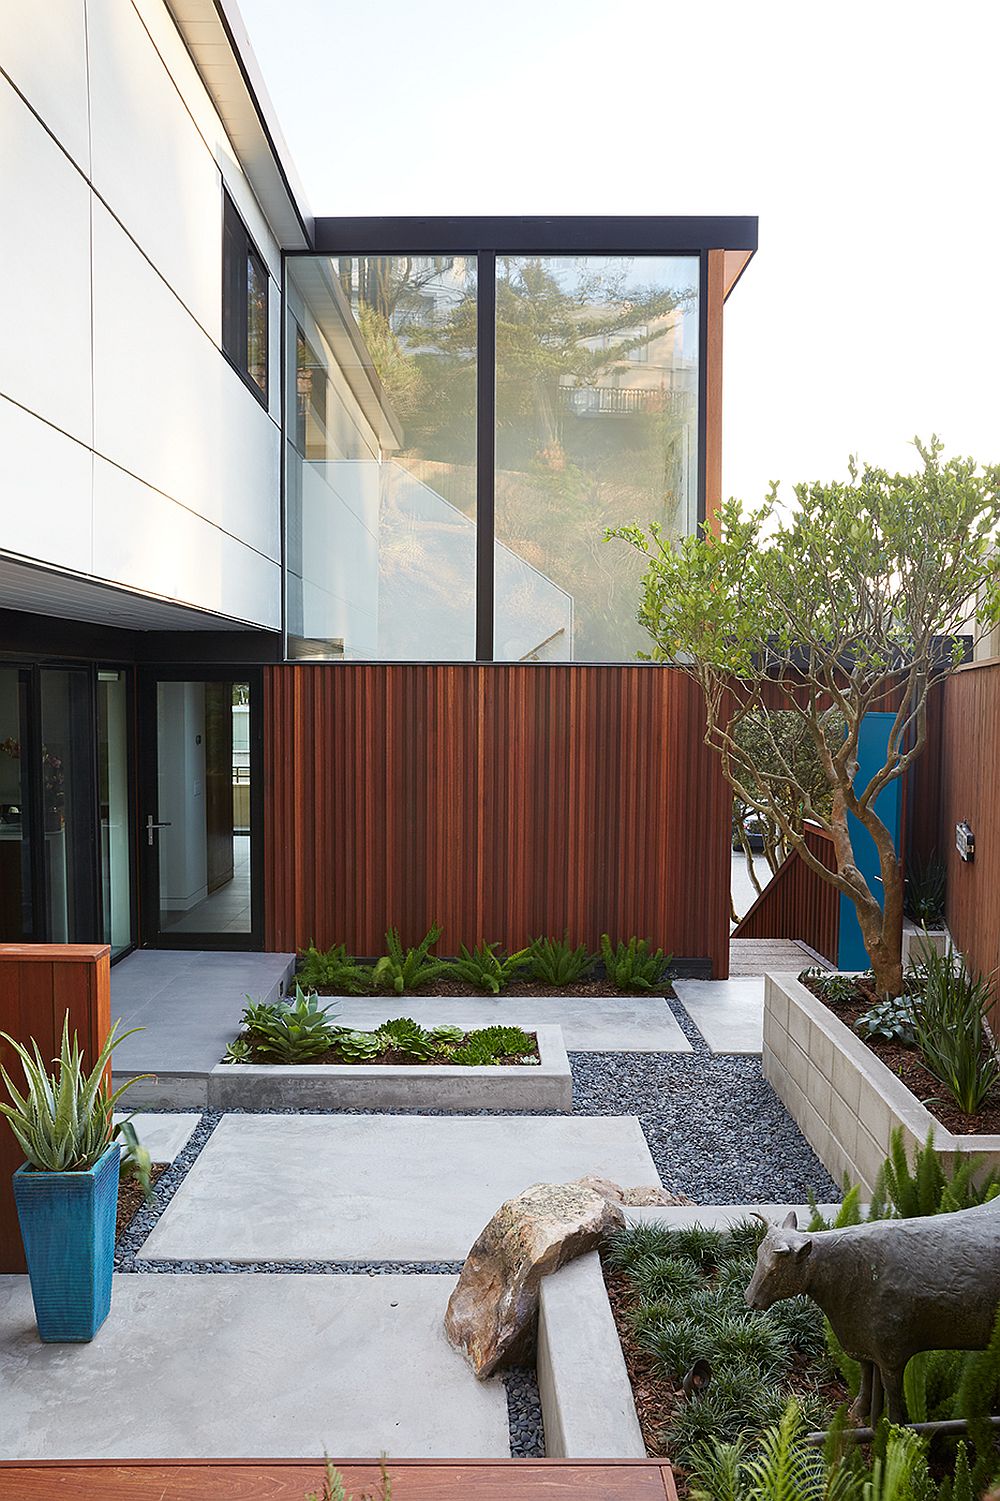 Small private yard of the remodeled Eichler Home in San Francisco